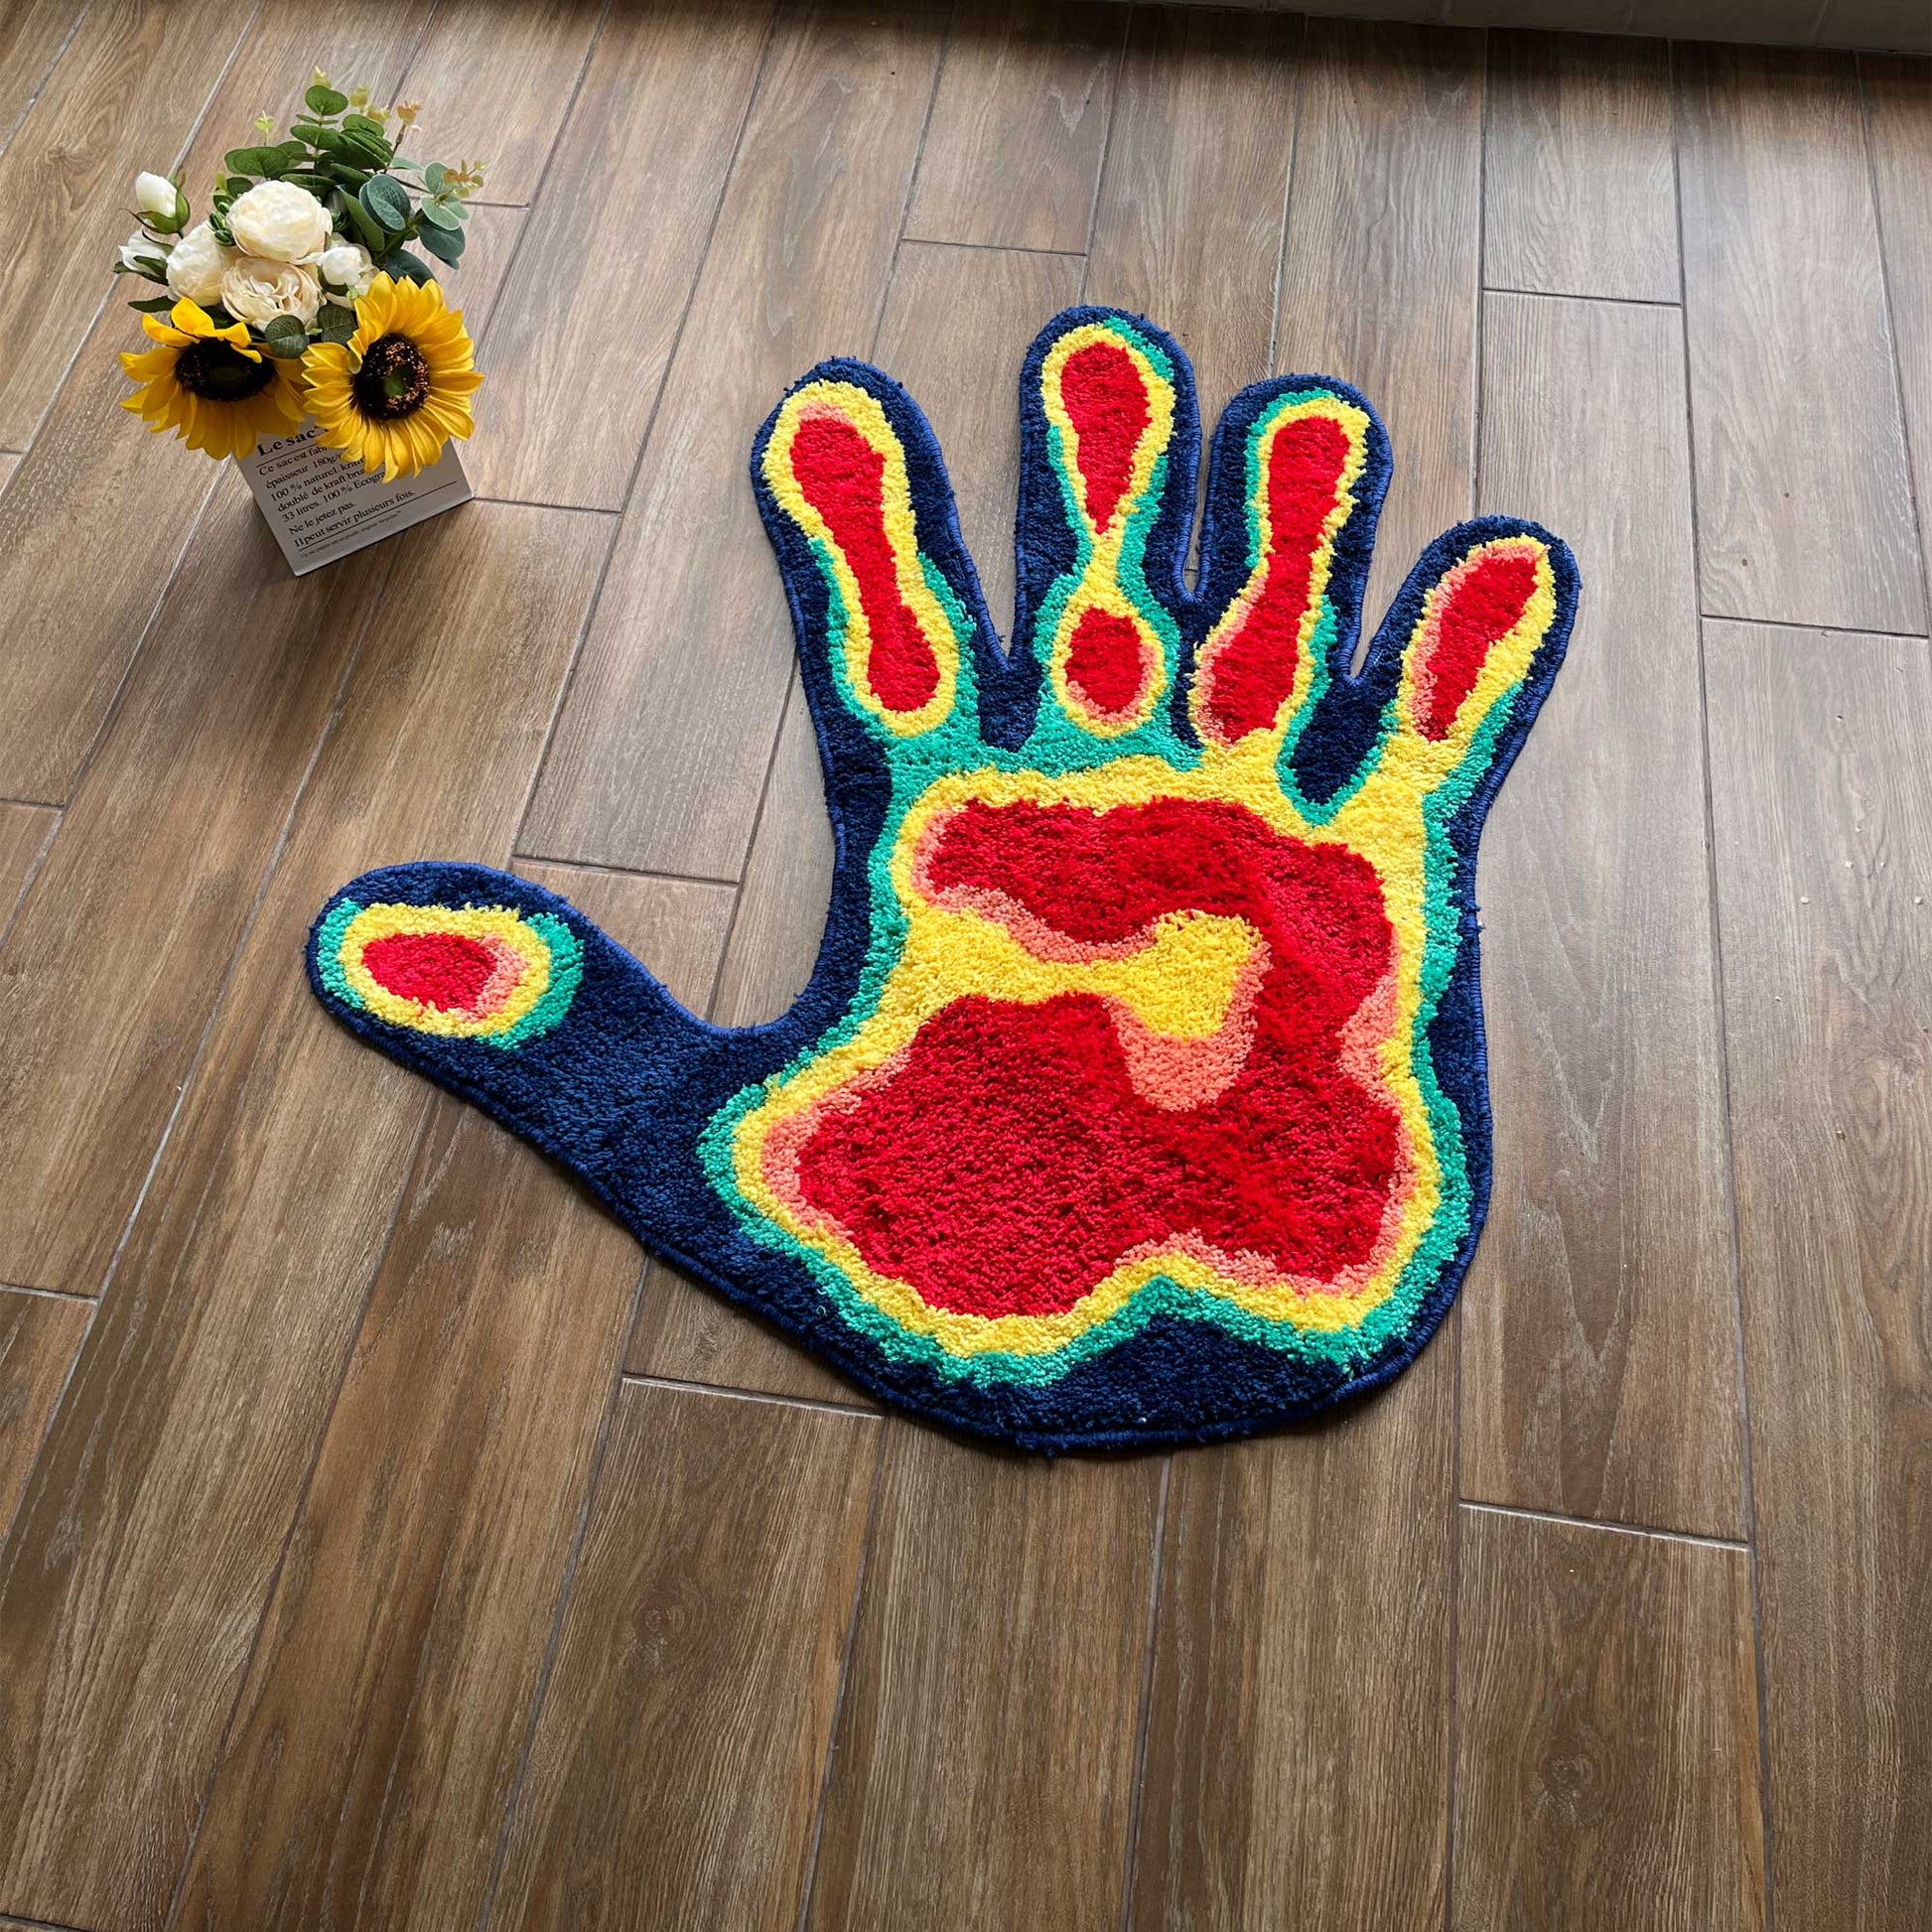 Tufted Rug Infrared Giant Hand Rug Overhead